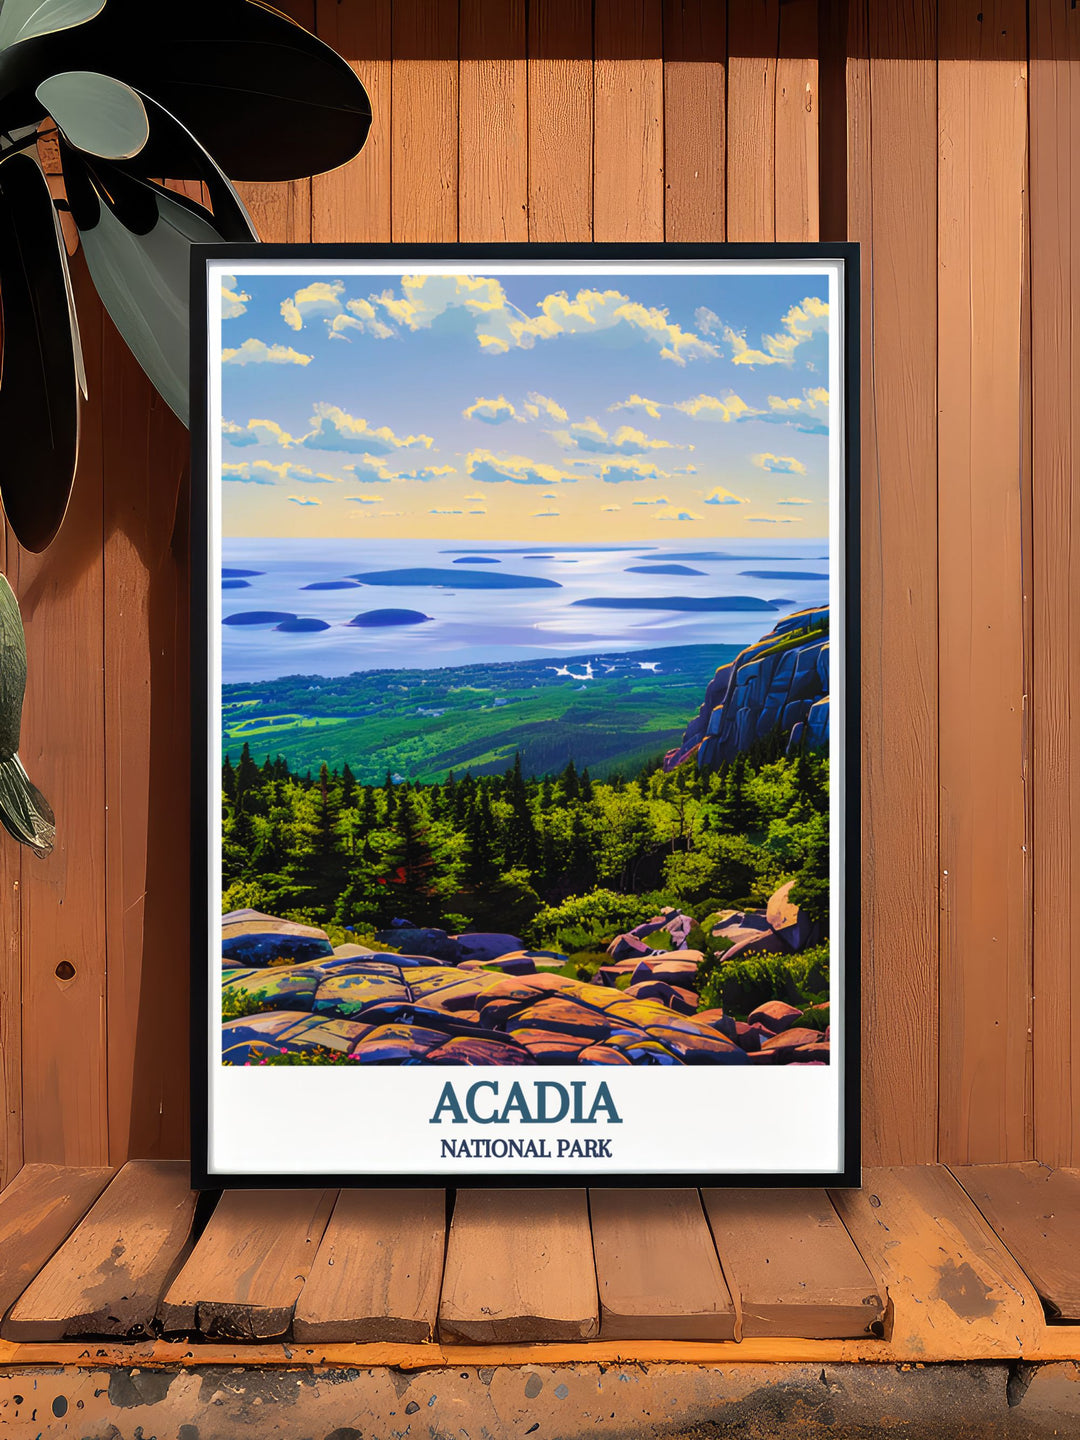 Cadillac Mountain poster from Acadia National Park ideal for nature enthusiasts and art collectors who love vintage prints and classic travel posters a perfect piece of art for enhancing home decor and celebrating the great outdoors.